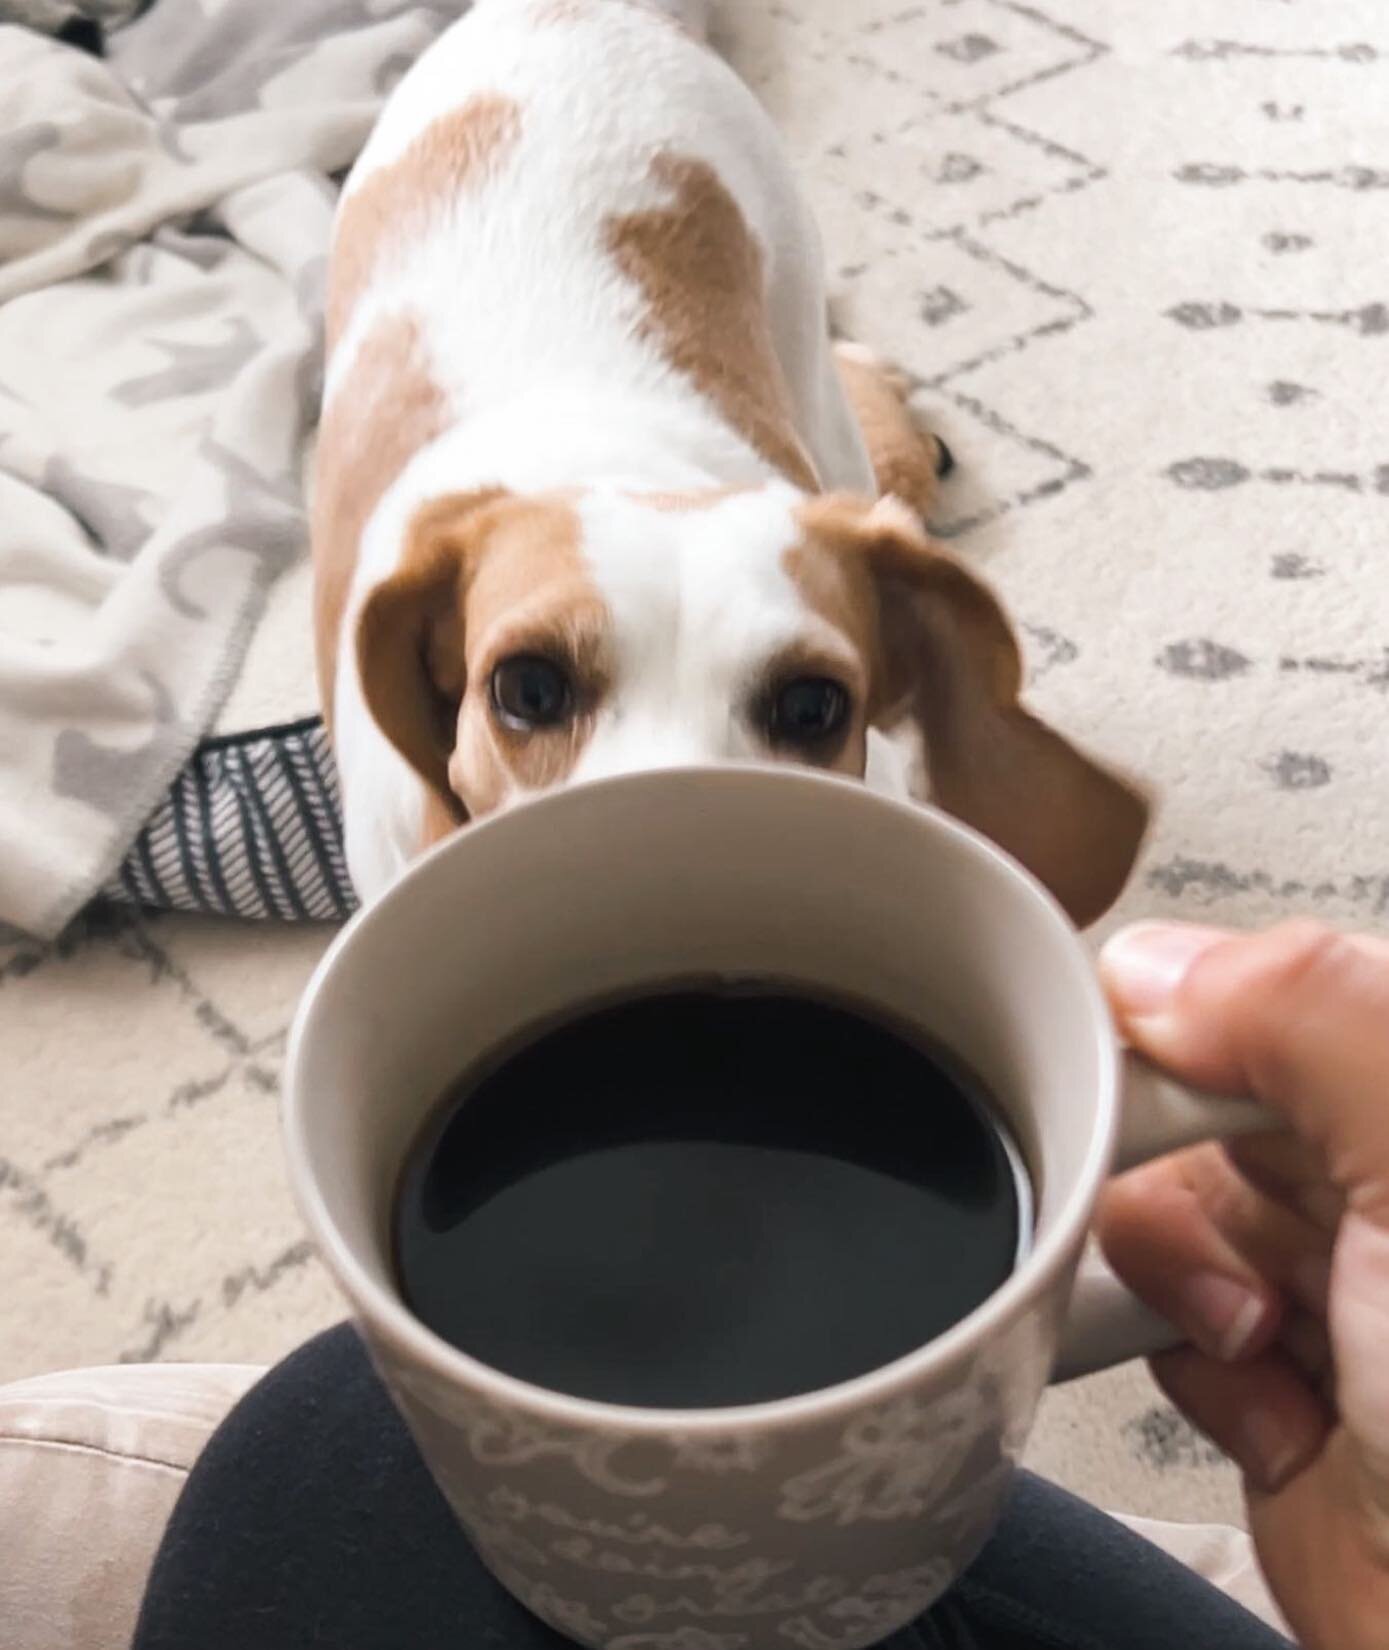 These 👀 always looking at me and what I have! 🤣🤣🤍🐶
.
.
.
.
.

#morningcoffee #coffeeanddogs #abmathome #mybhg #simplyhome #abmlittlethings #choosejoy #slowmorning #rescuebeagle #happydog #abmhappylife #goodthings #happylittlemoments #theeverygir